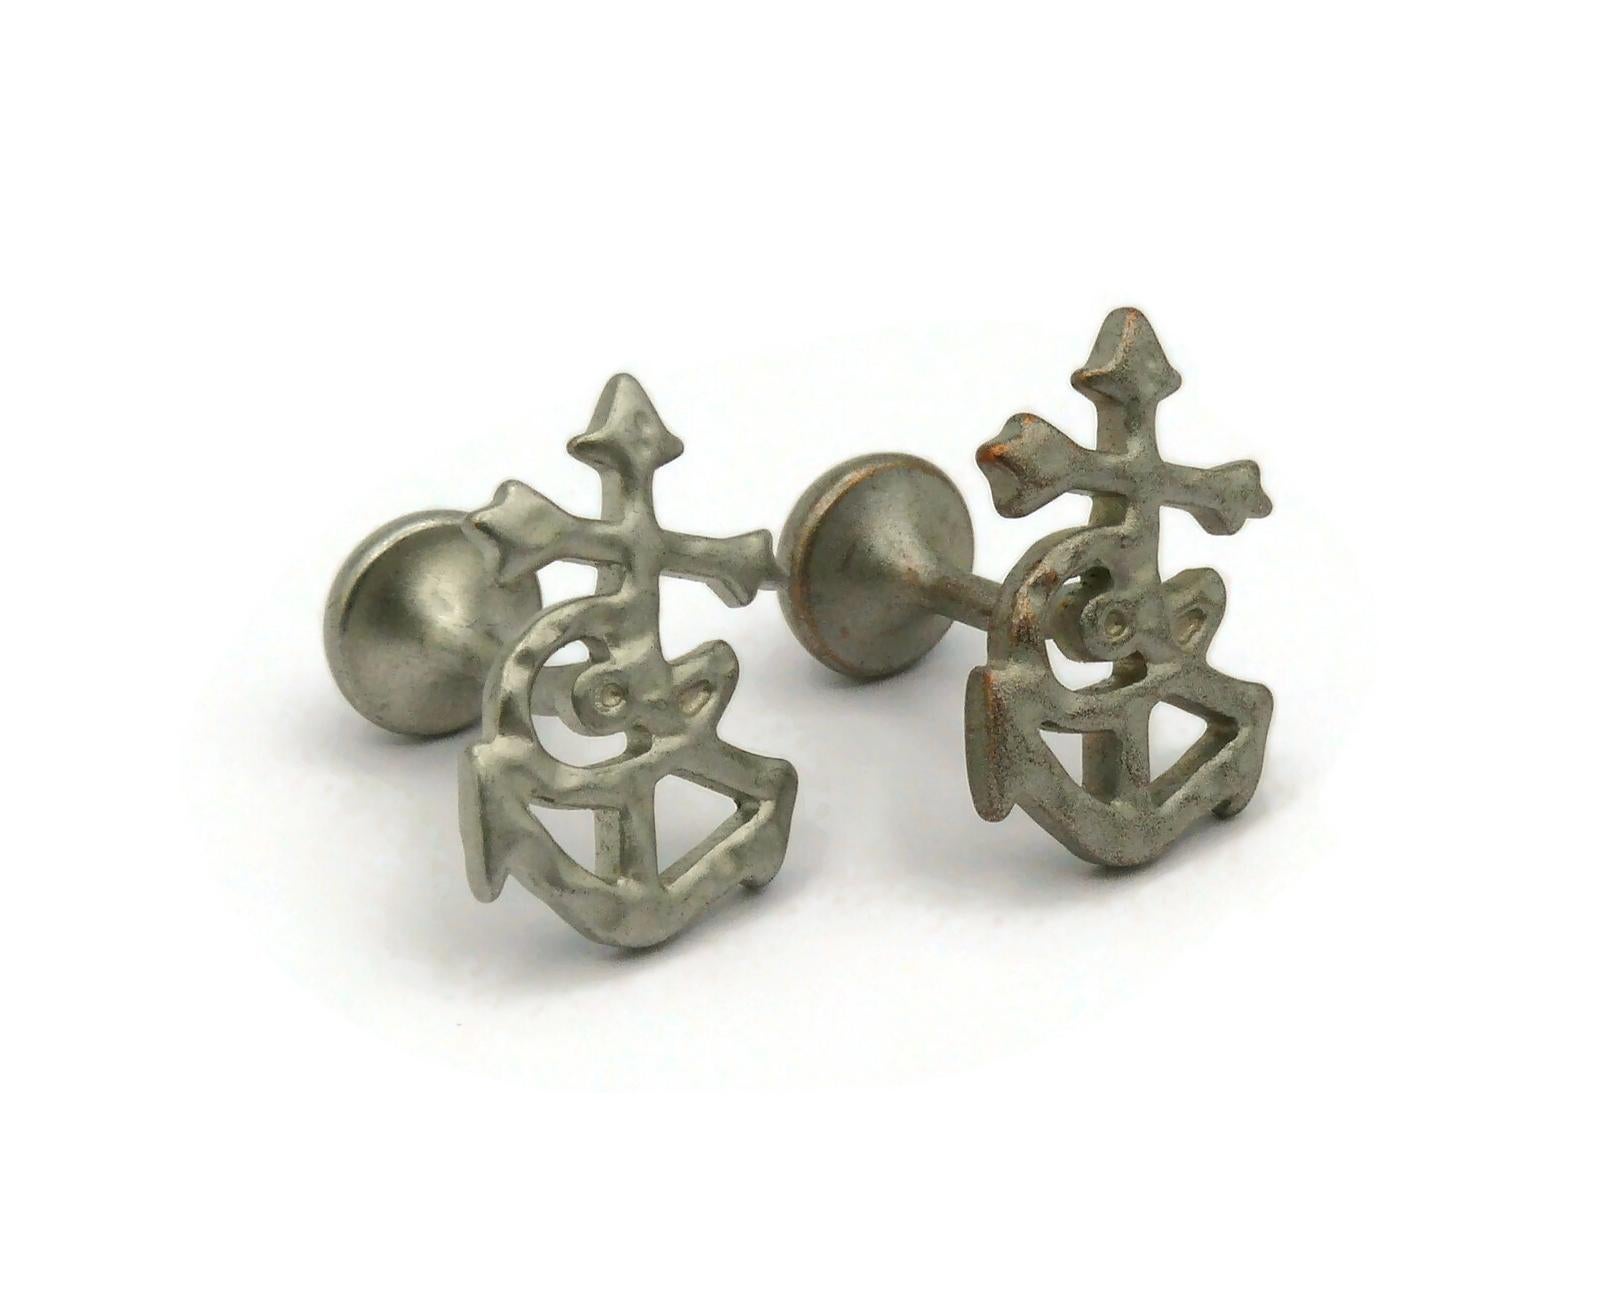 CHRISTIAN LACROIX vintage matte silver tone cufflinks featuring a Camarguaise cross with CL monogram.

Unmarked.

Indicative measurements : max. height approx. 2 cm (0.79 inch) / max width approx. 1.9 cm (0.75 inch).

Material : Matte silver tone